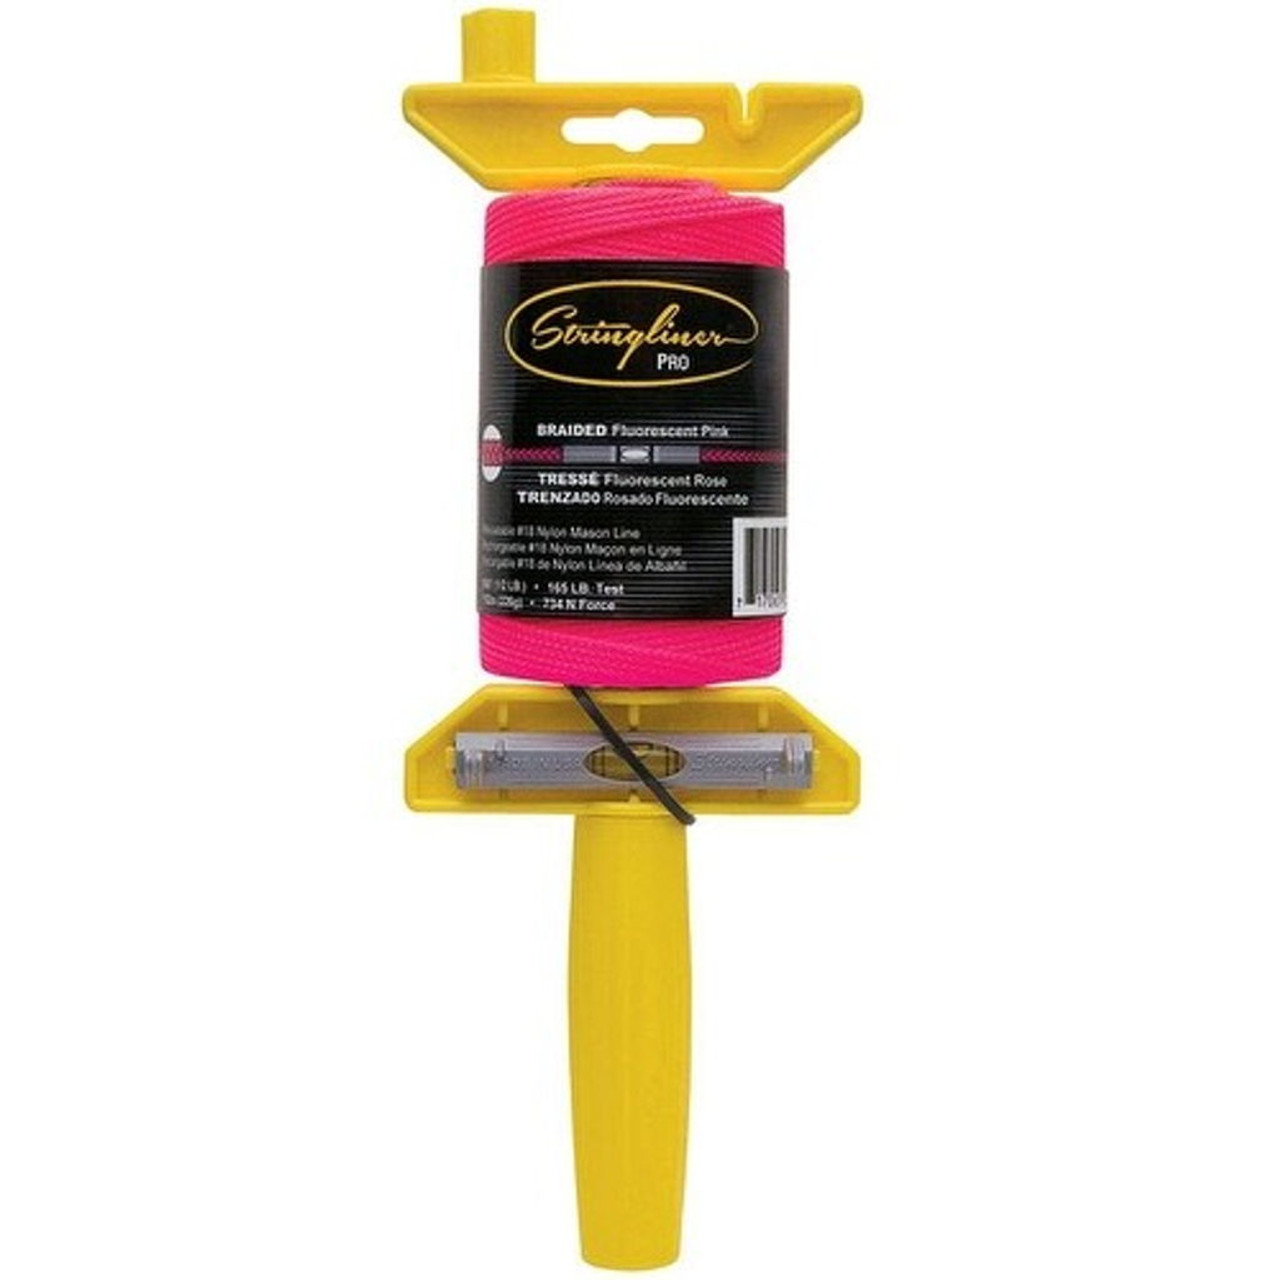 Stringliner Pro Braided Chalk Line With Reel - Fluorescent Pink